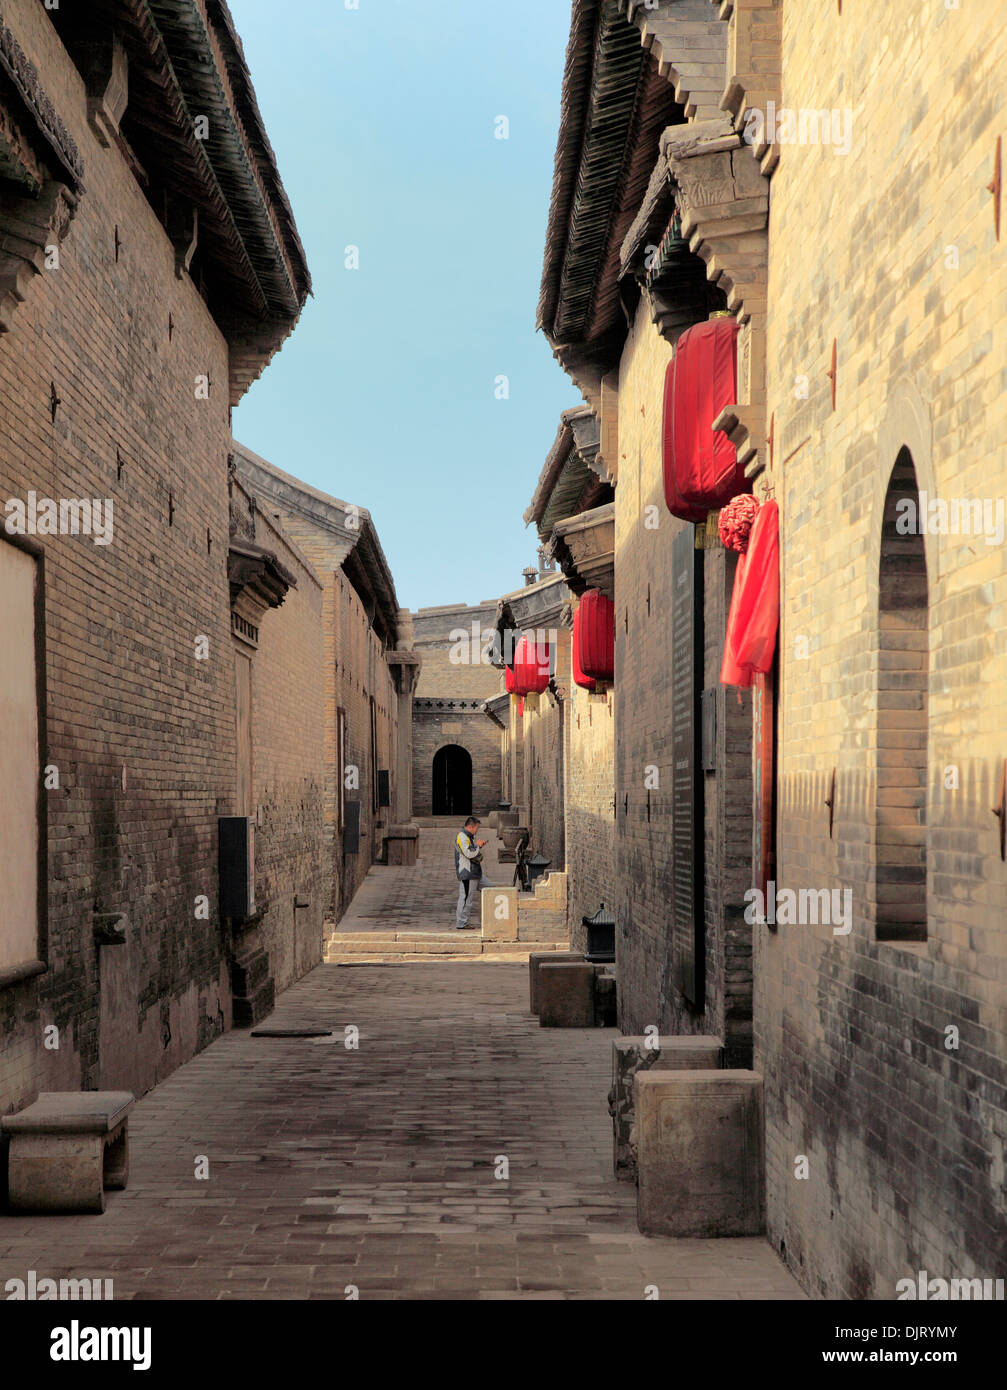 Street in old town, Pingyao, Shanxi, China Stock Photo